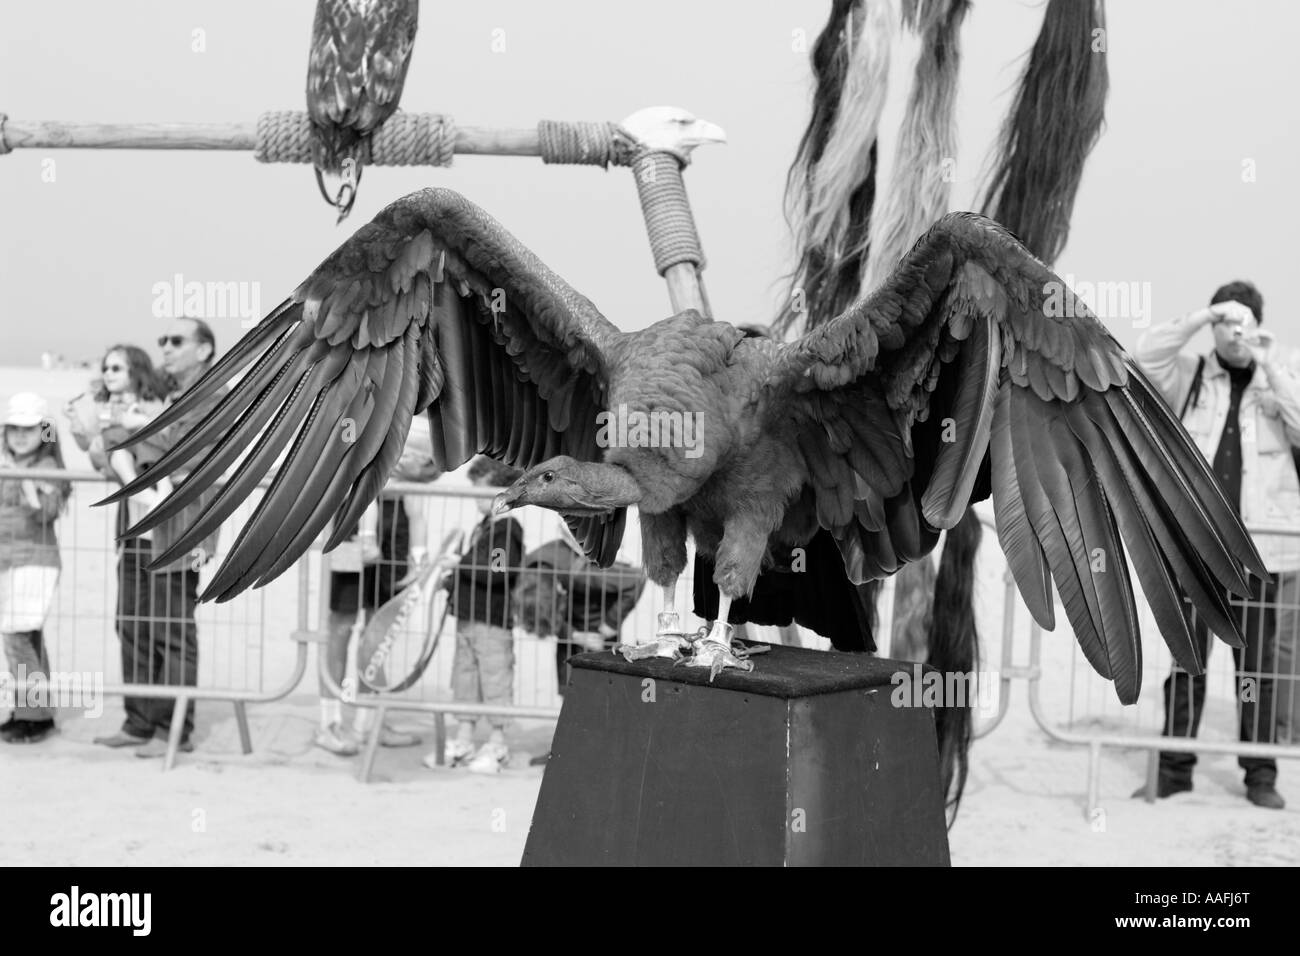 Big vulture bird Black and White Stock Photos & Images - Alamy